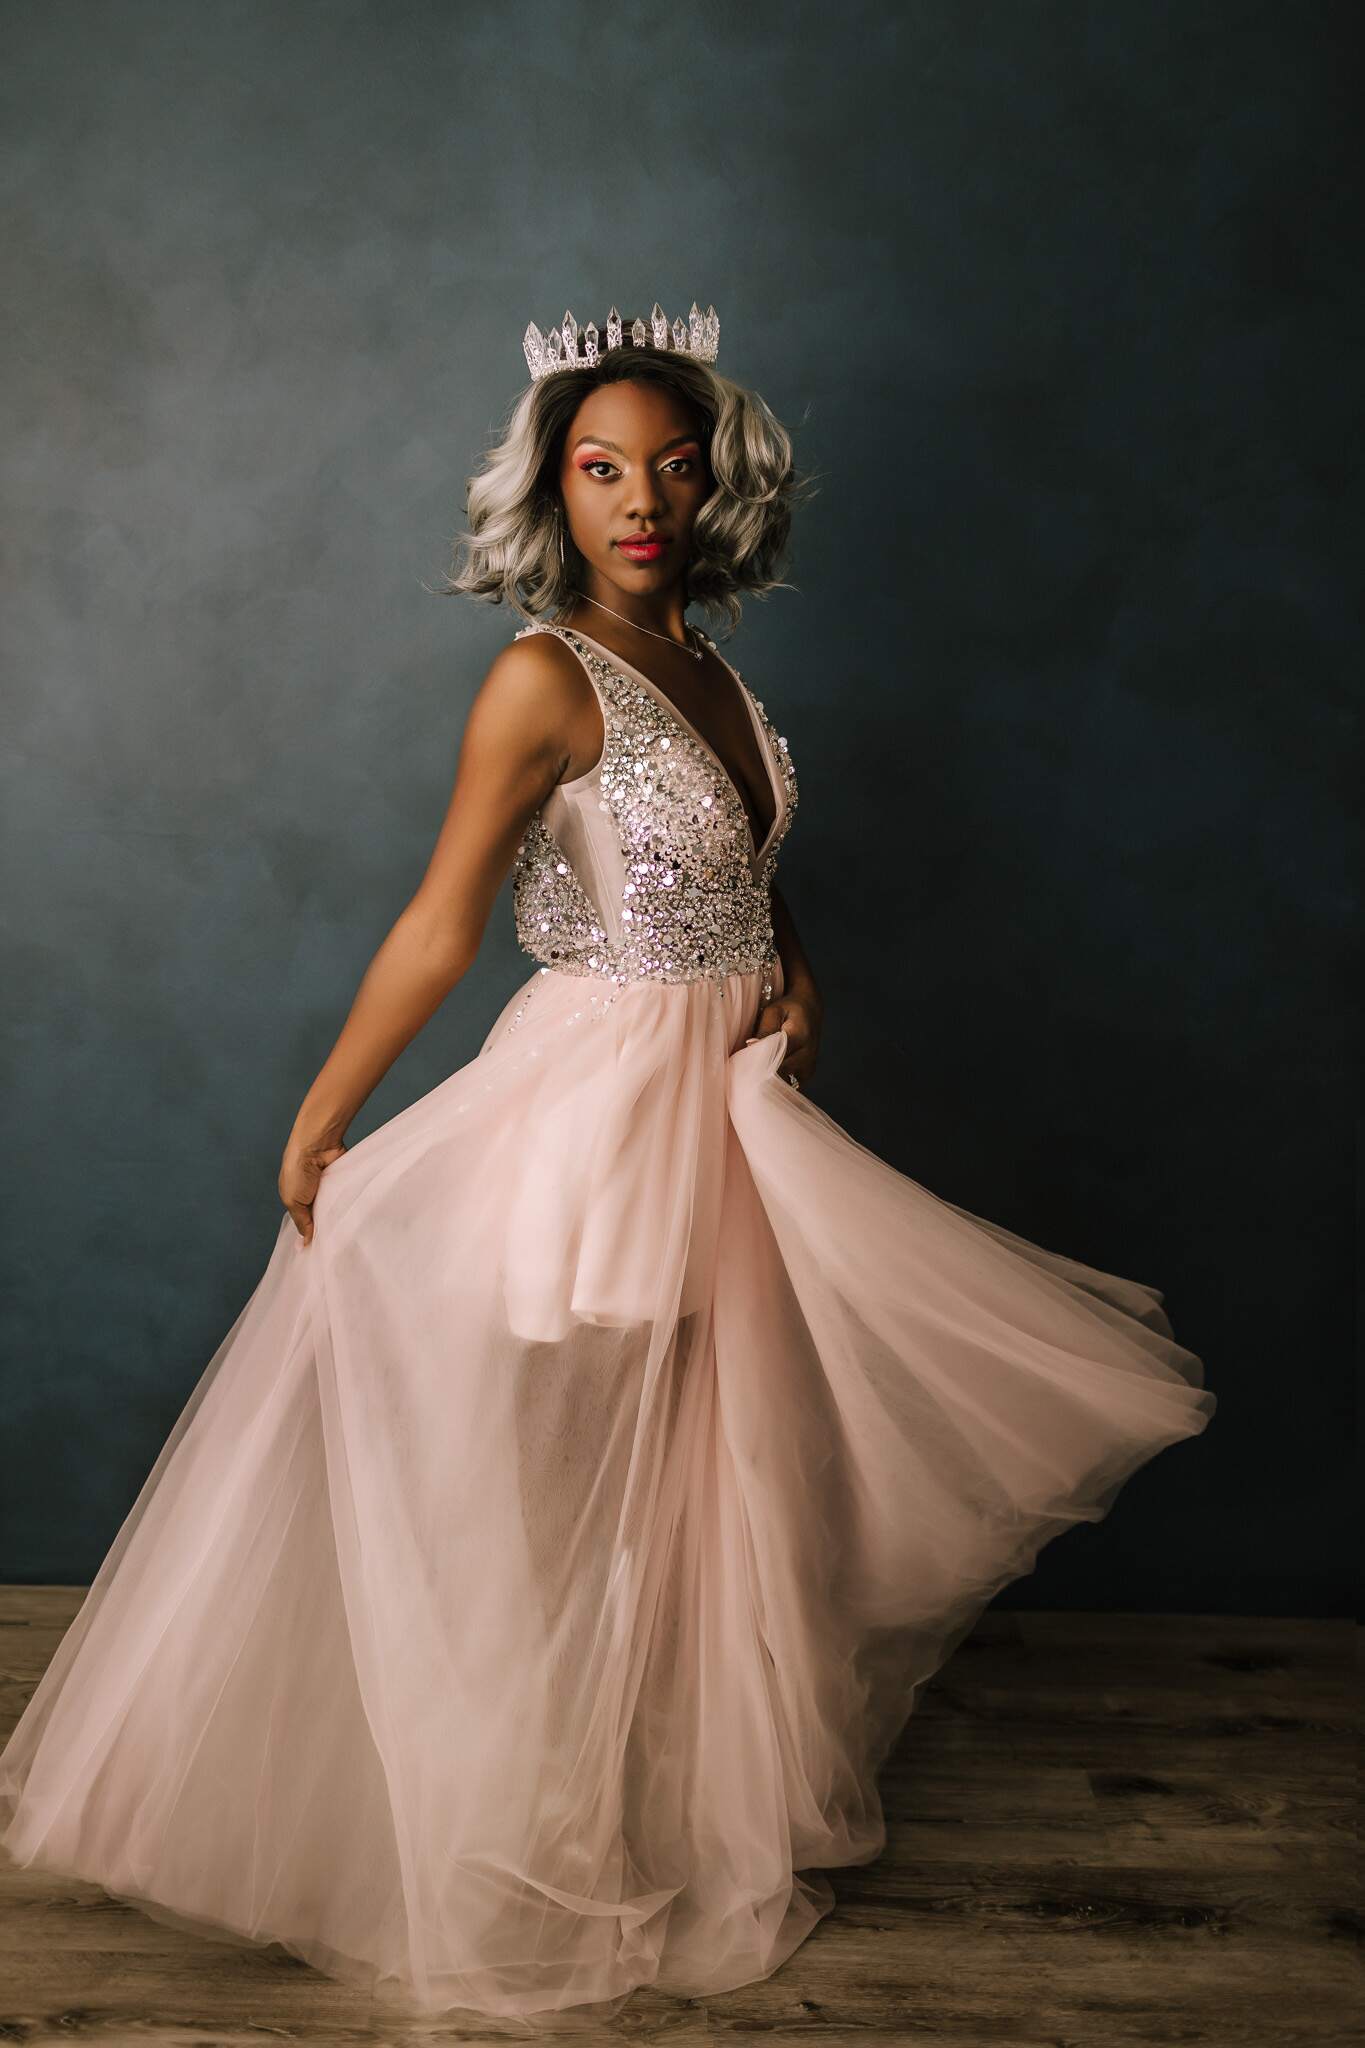 Professional, sexy and fun beauty shots in a studio in PA in formal gowns and crowns.